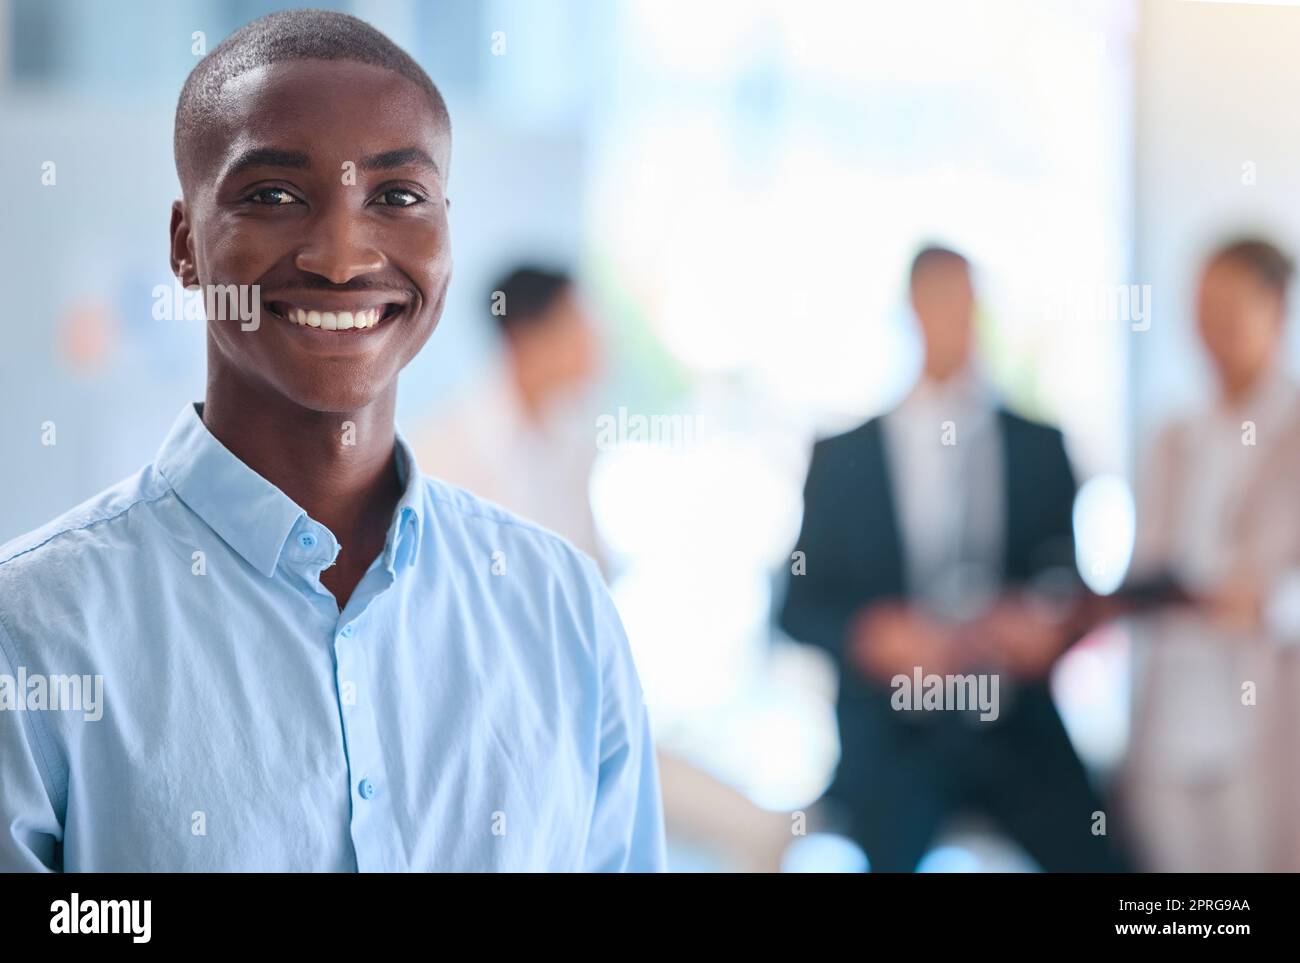 Portrait of smiling face of business man working at corporate company, leadership of African businessman in meeting at office. Black manager, employee or worker proud of startup and teamwork Stock Photo